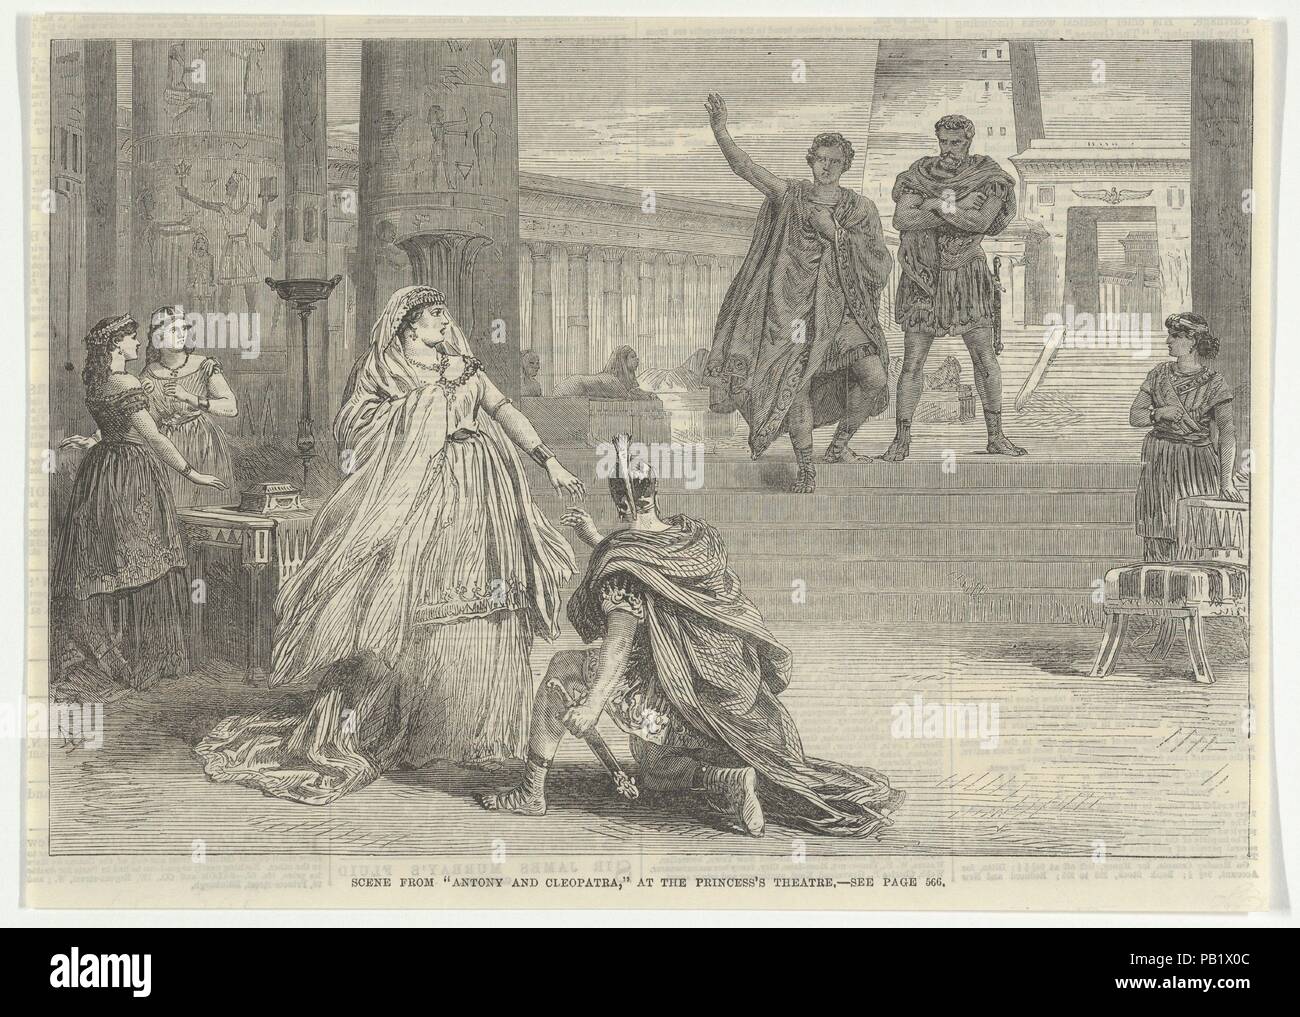 Scene from Antony and Cleopatra, at the Princess's Theatre, for 'Illustrated London News'. Artist: after Arthur Hopkins (British, London 1848-1930). Dimensions: Sheet: 6 7/8 × 9 5/8 in. (17.5 × 24.5 cm). Subject: William Shakespeare (British, Stratford-upon-Avon 1564-1616 Stratford-upon-Avon). Date: June 8, 1867. Museum: Metropolitan Museum of Art, New York, USA. Stock Photo